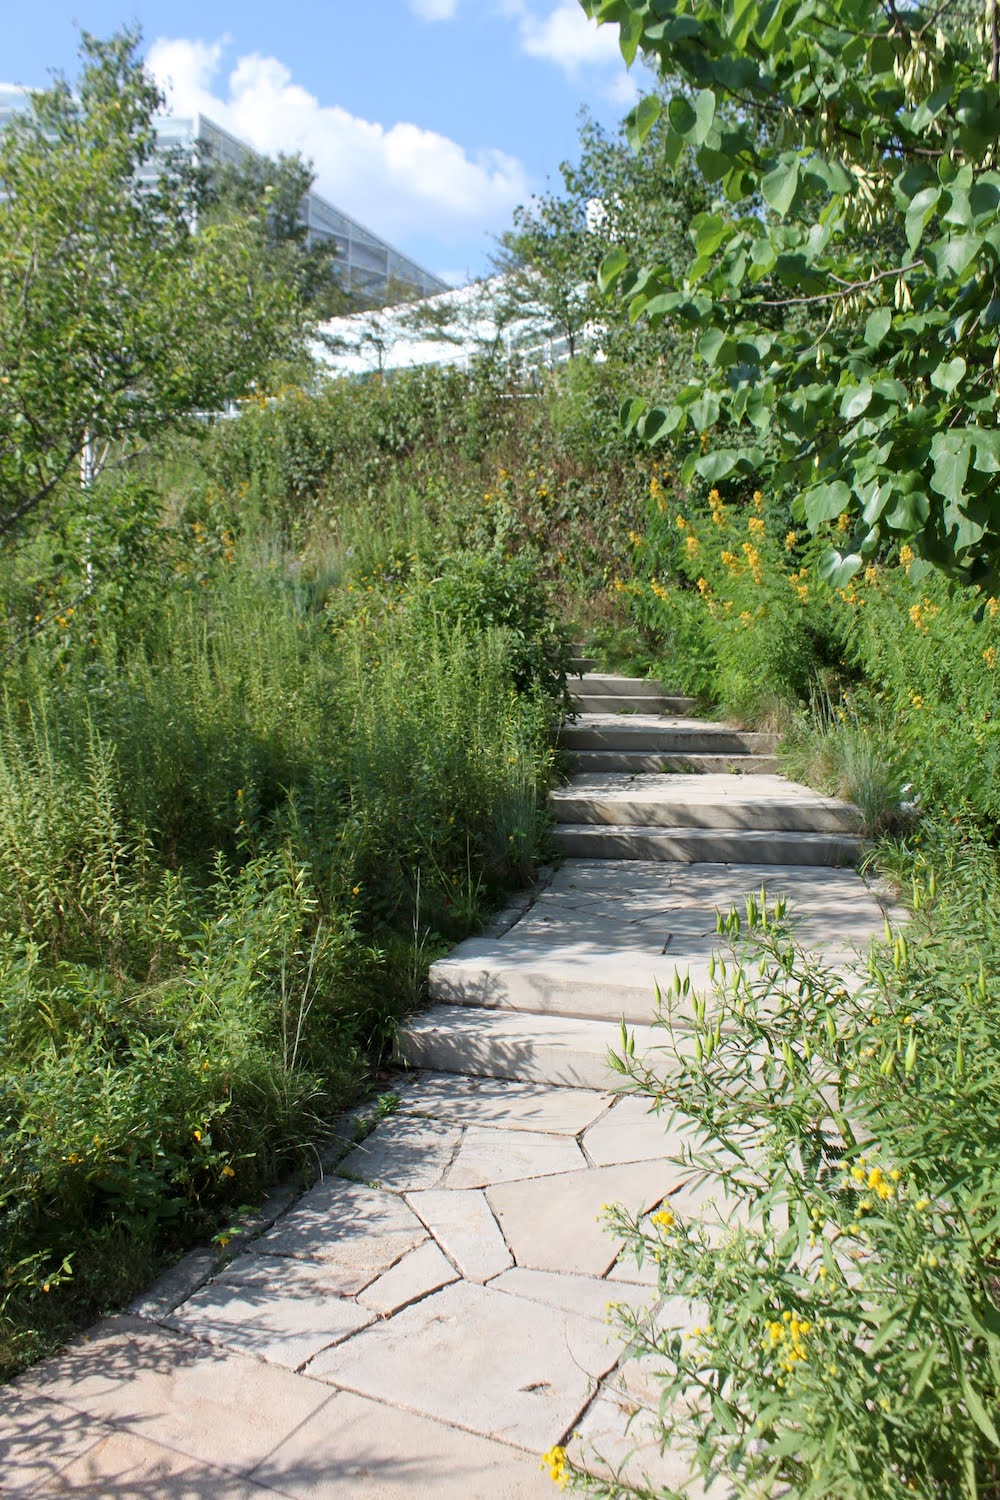 The Path that draws the garden visitor onward